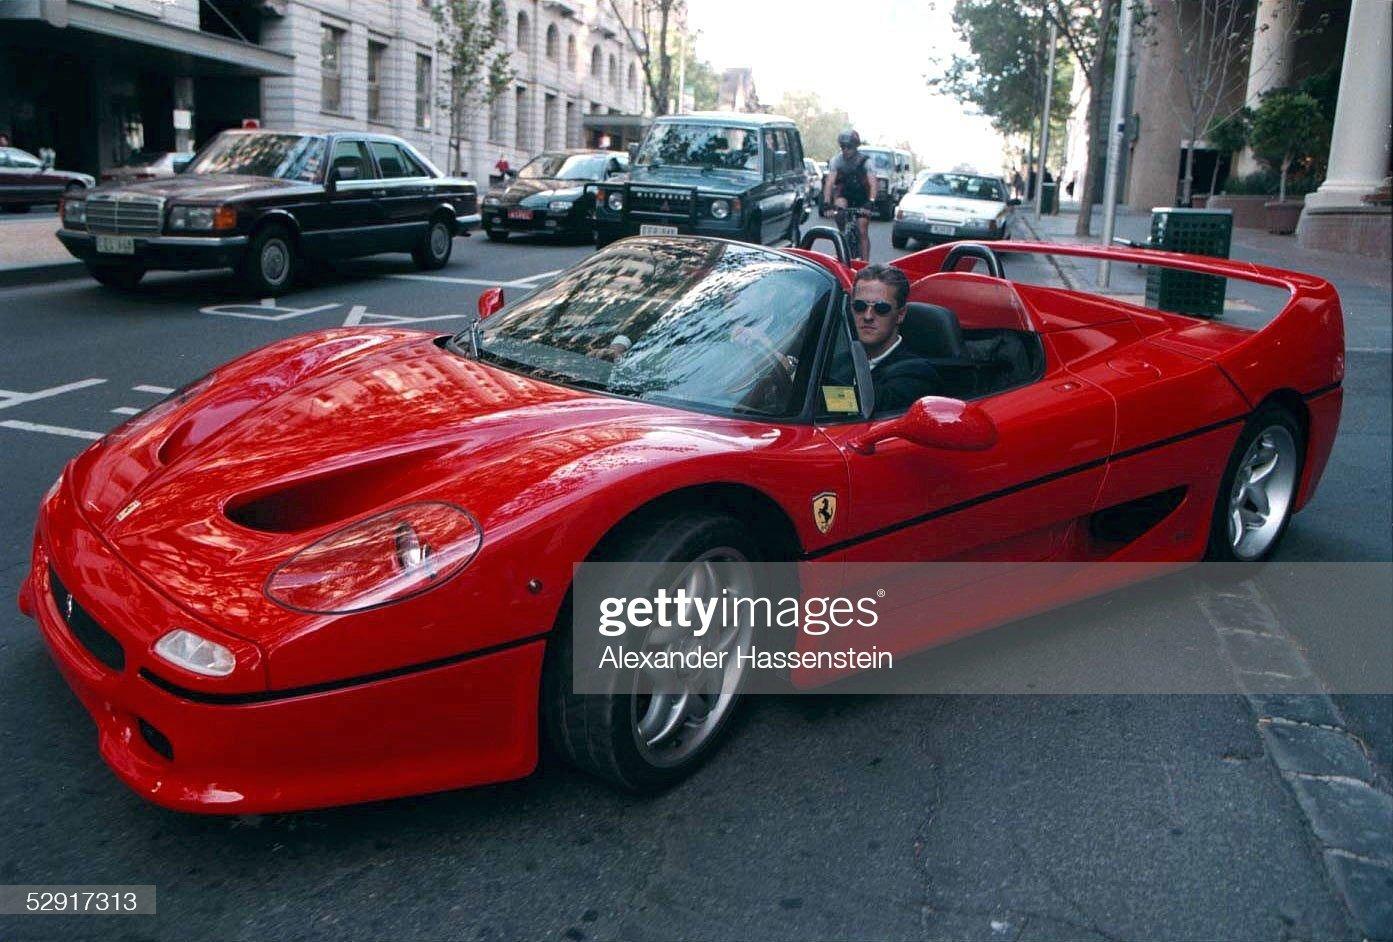 Michael Schumacher on a joyride in the Ferrari on March 07, 1996 at Melbourne for the Australian Grand Prix.